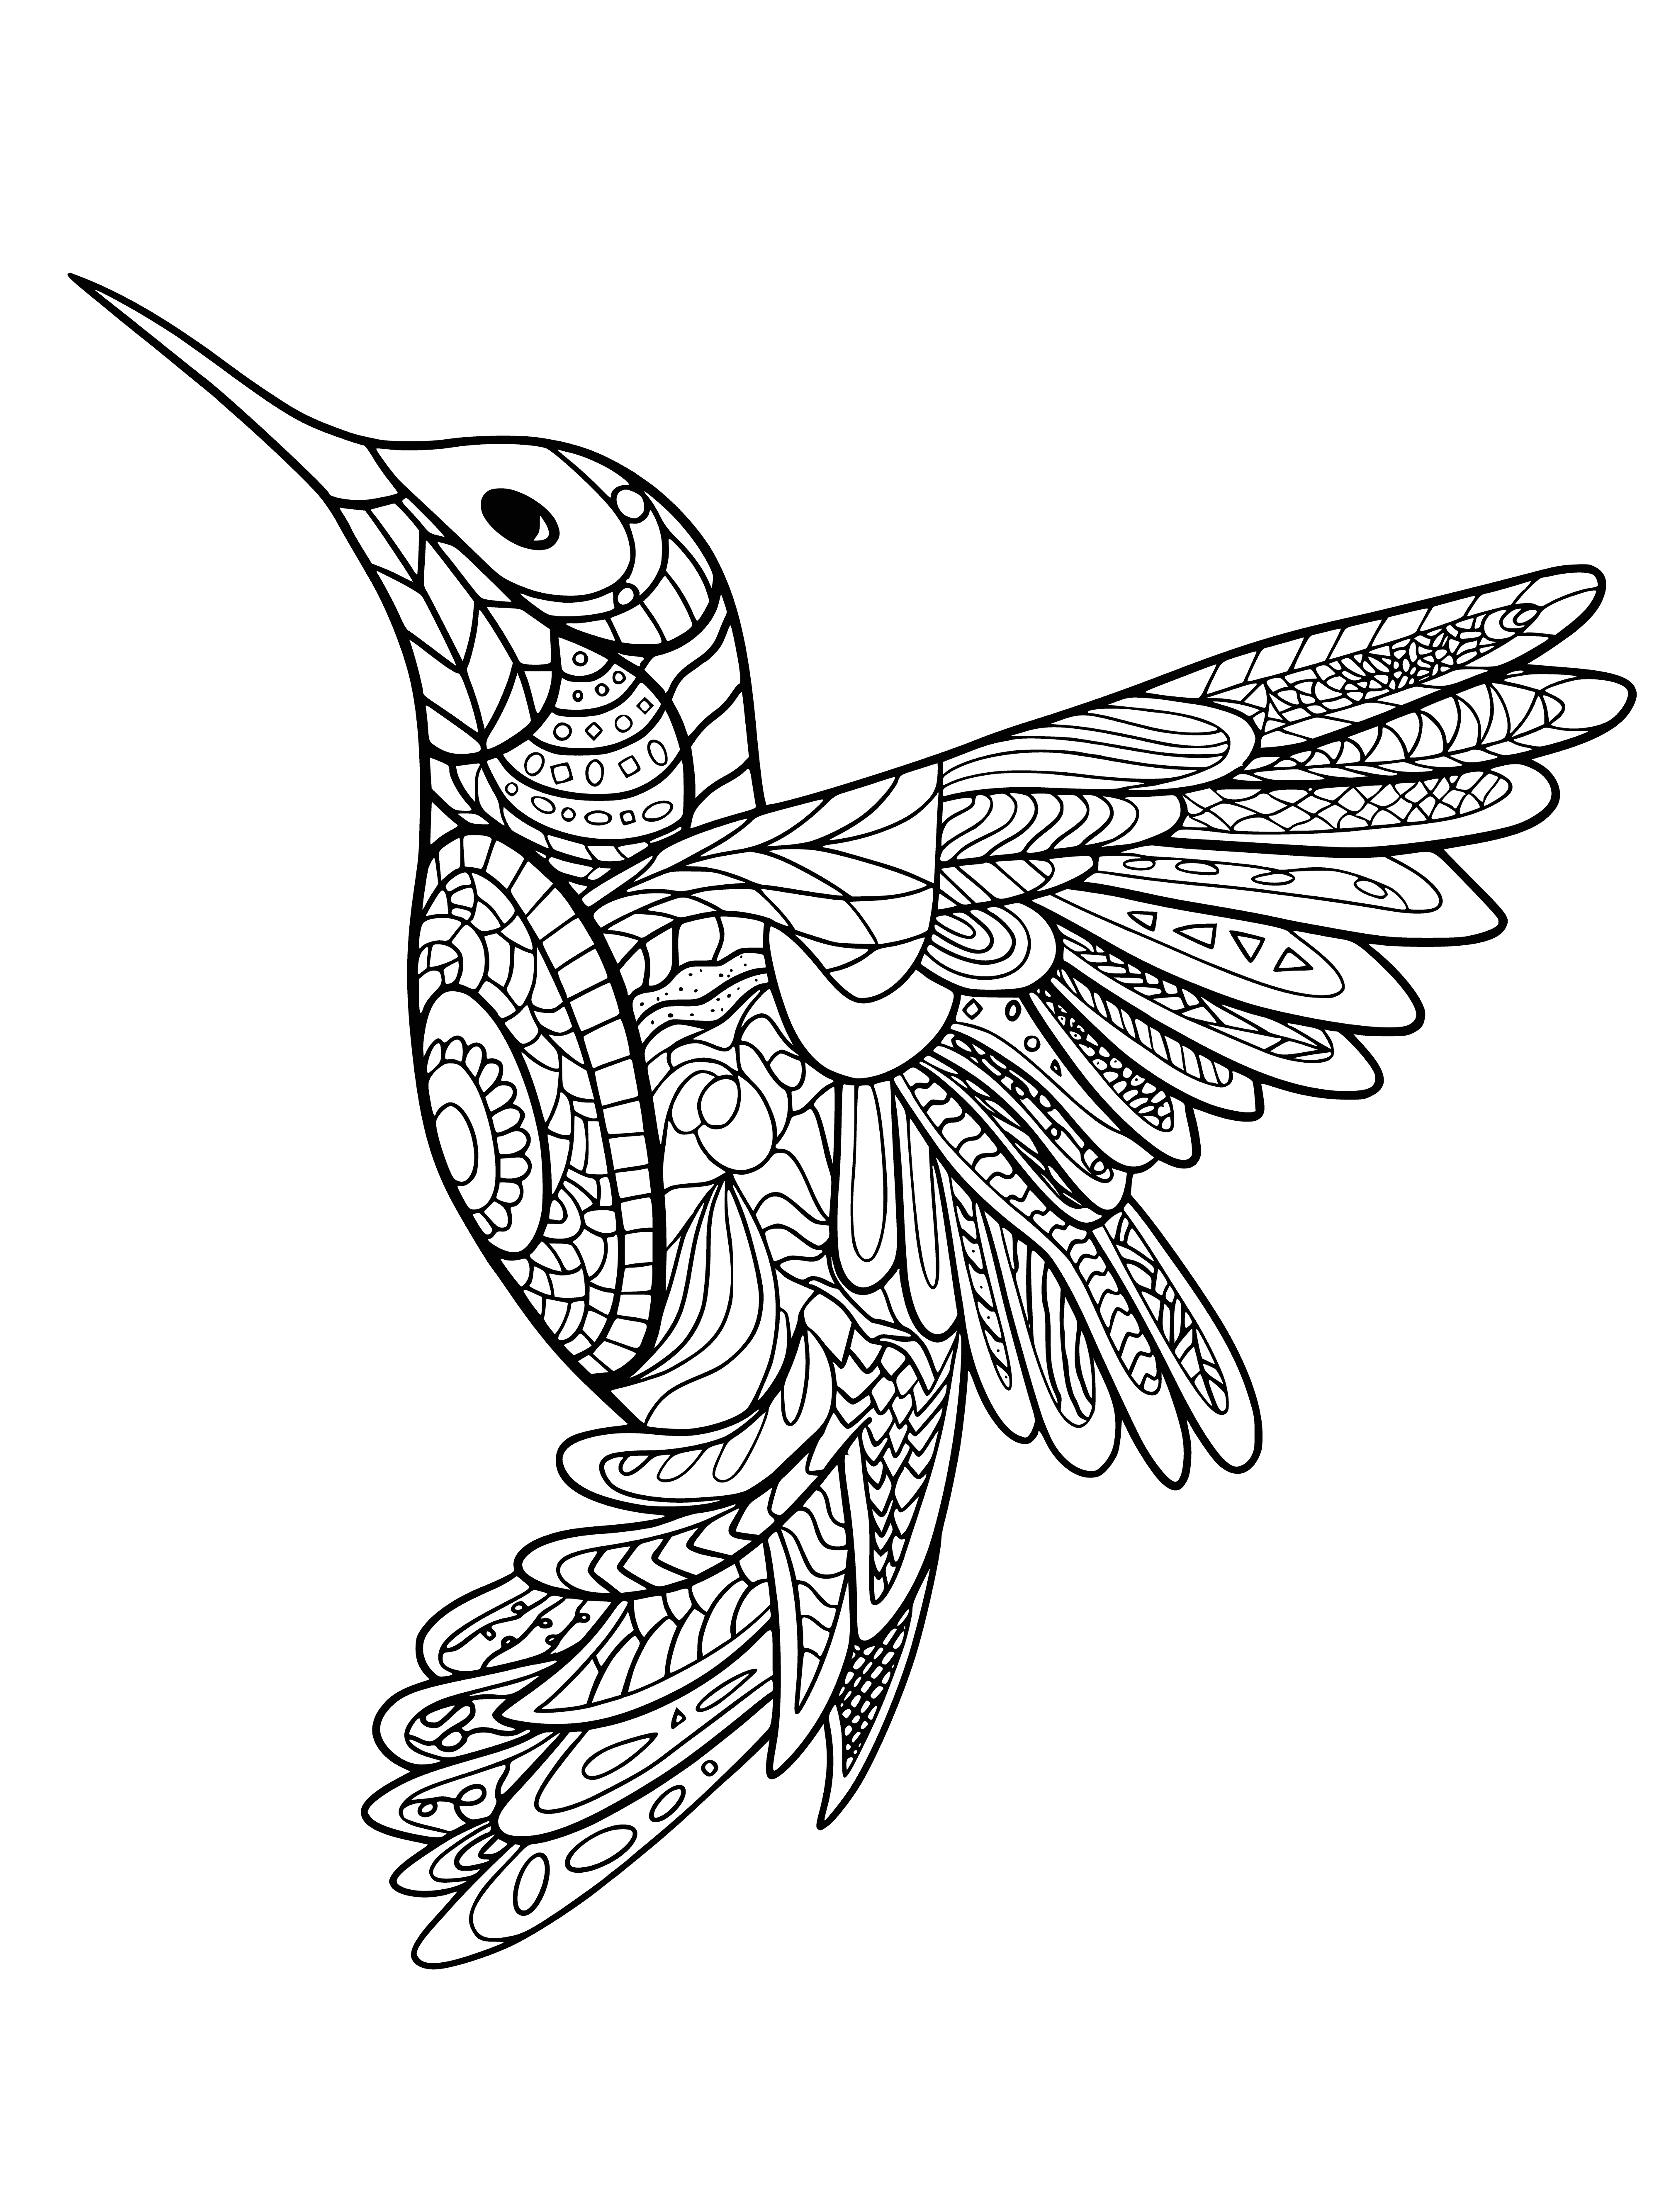 coloring page: -->Two hummingbirds hover over a brightly colored flower, sipping nectar from its petals with their long beaks.